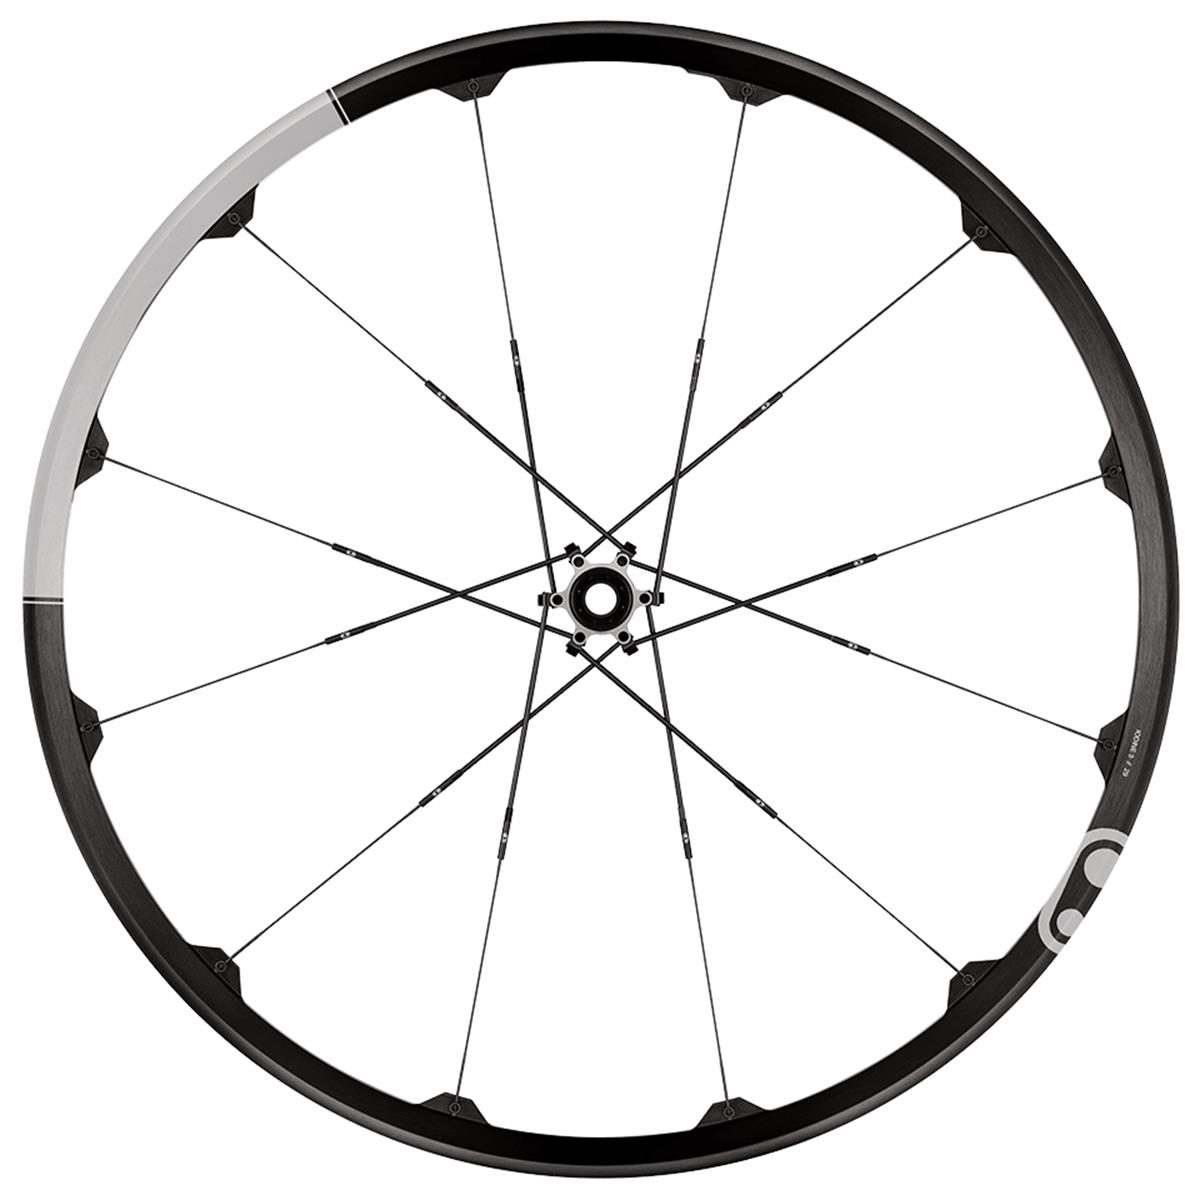 Crankbrothers Wheel Set Iodine 3 Black/Silver, 27.5 Inches, 15x100 mm/12x142 mm, Tubeless Ready